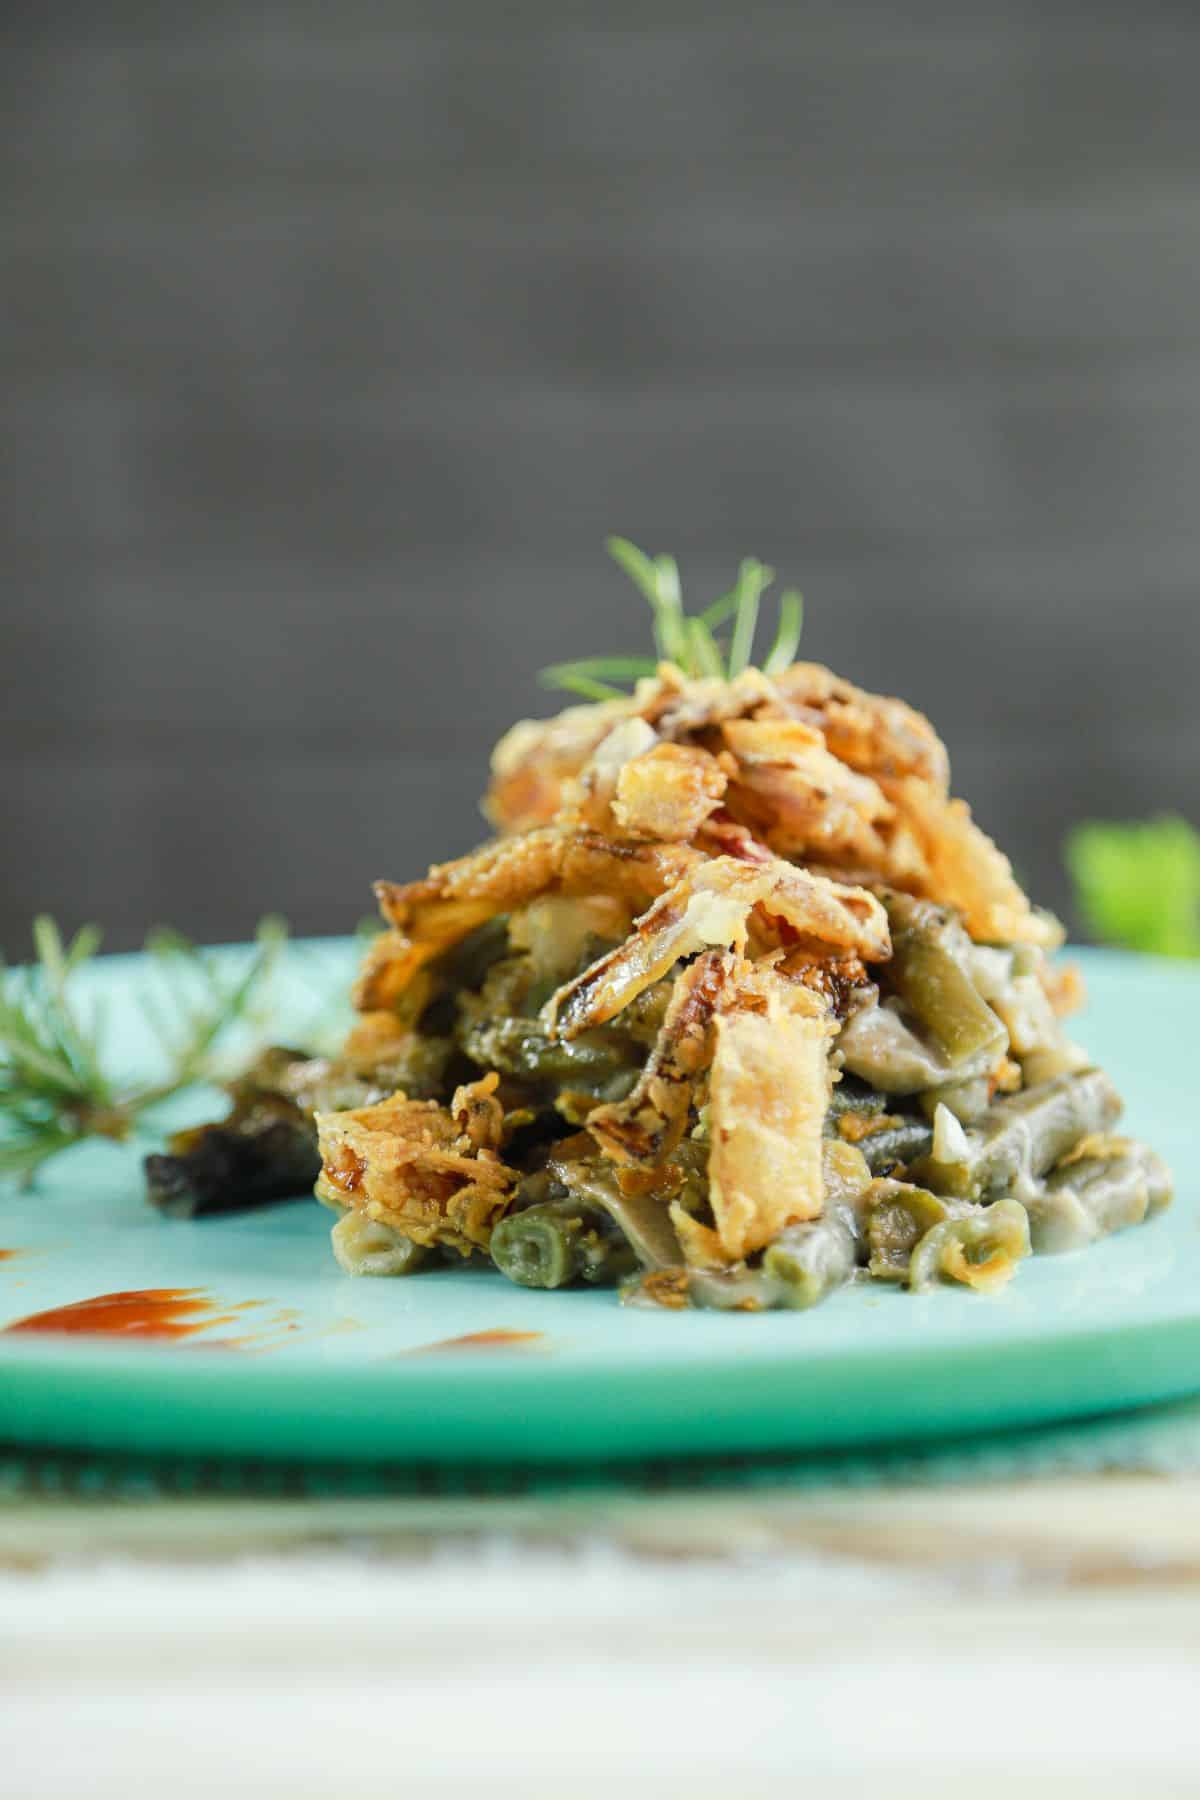 teal plate of green bean casserole on light wood table with gray background